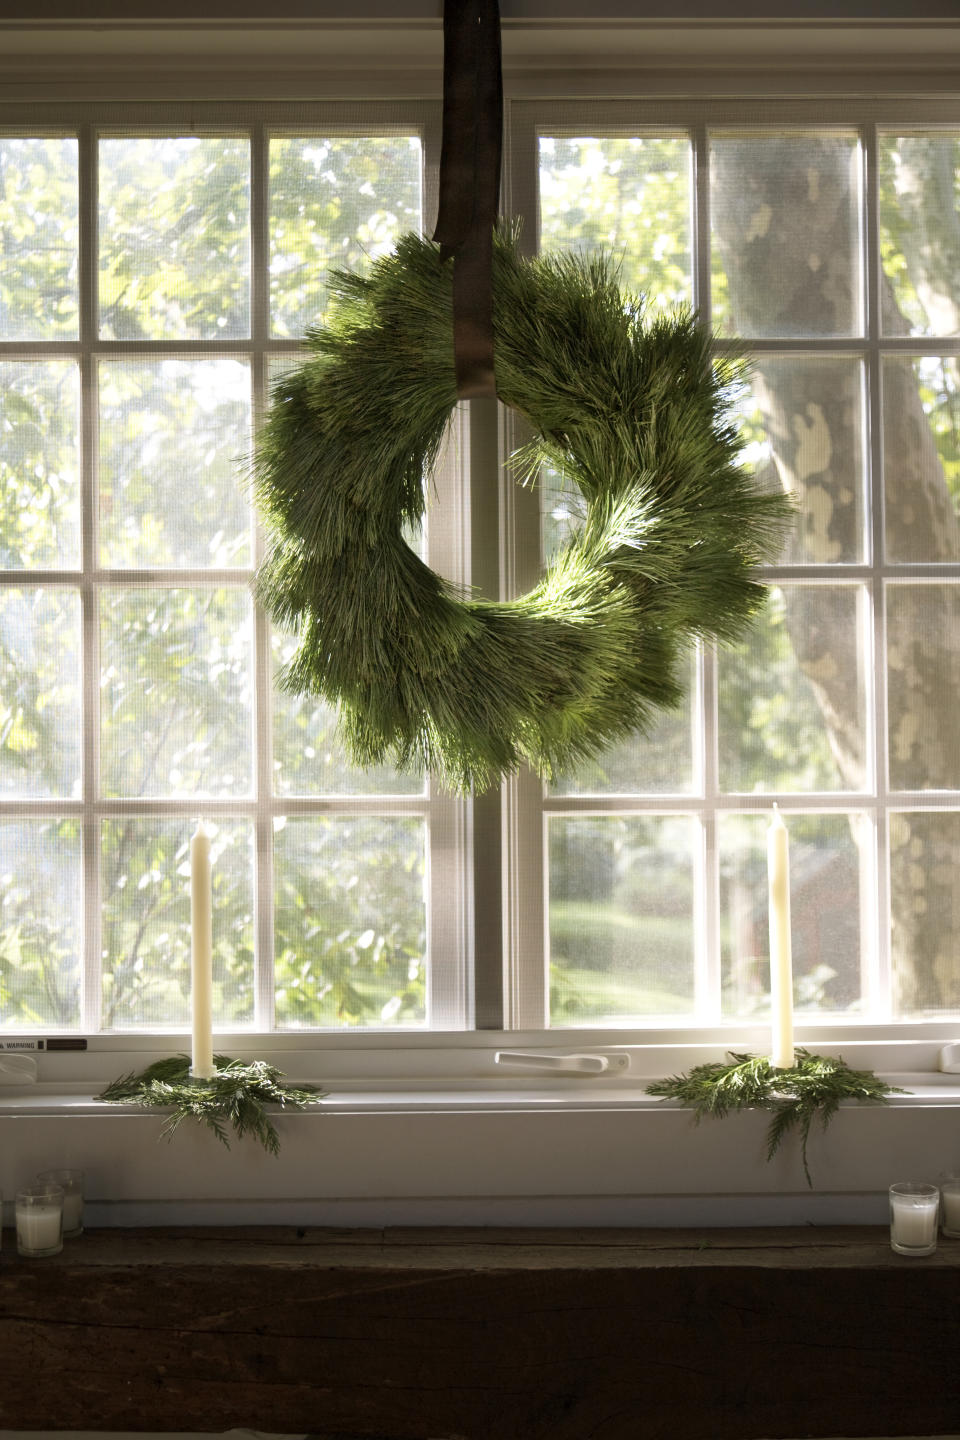 A Christmas wreath hanging in a window